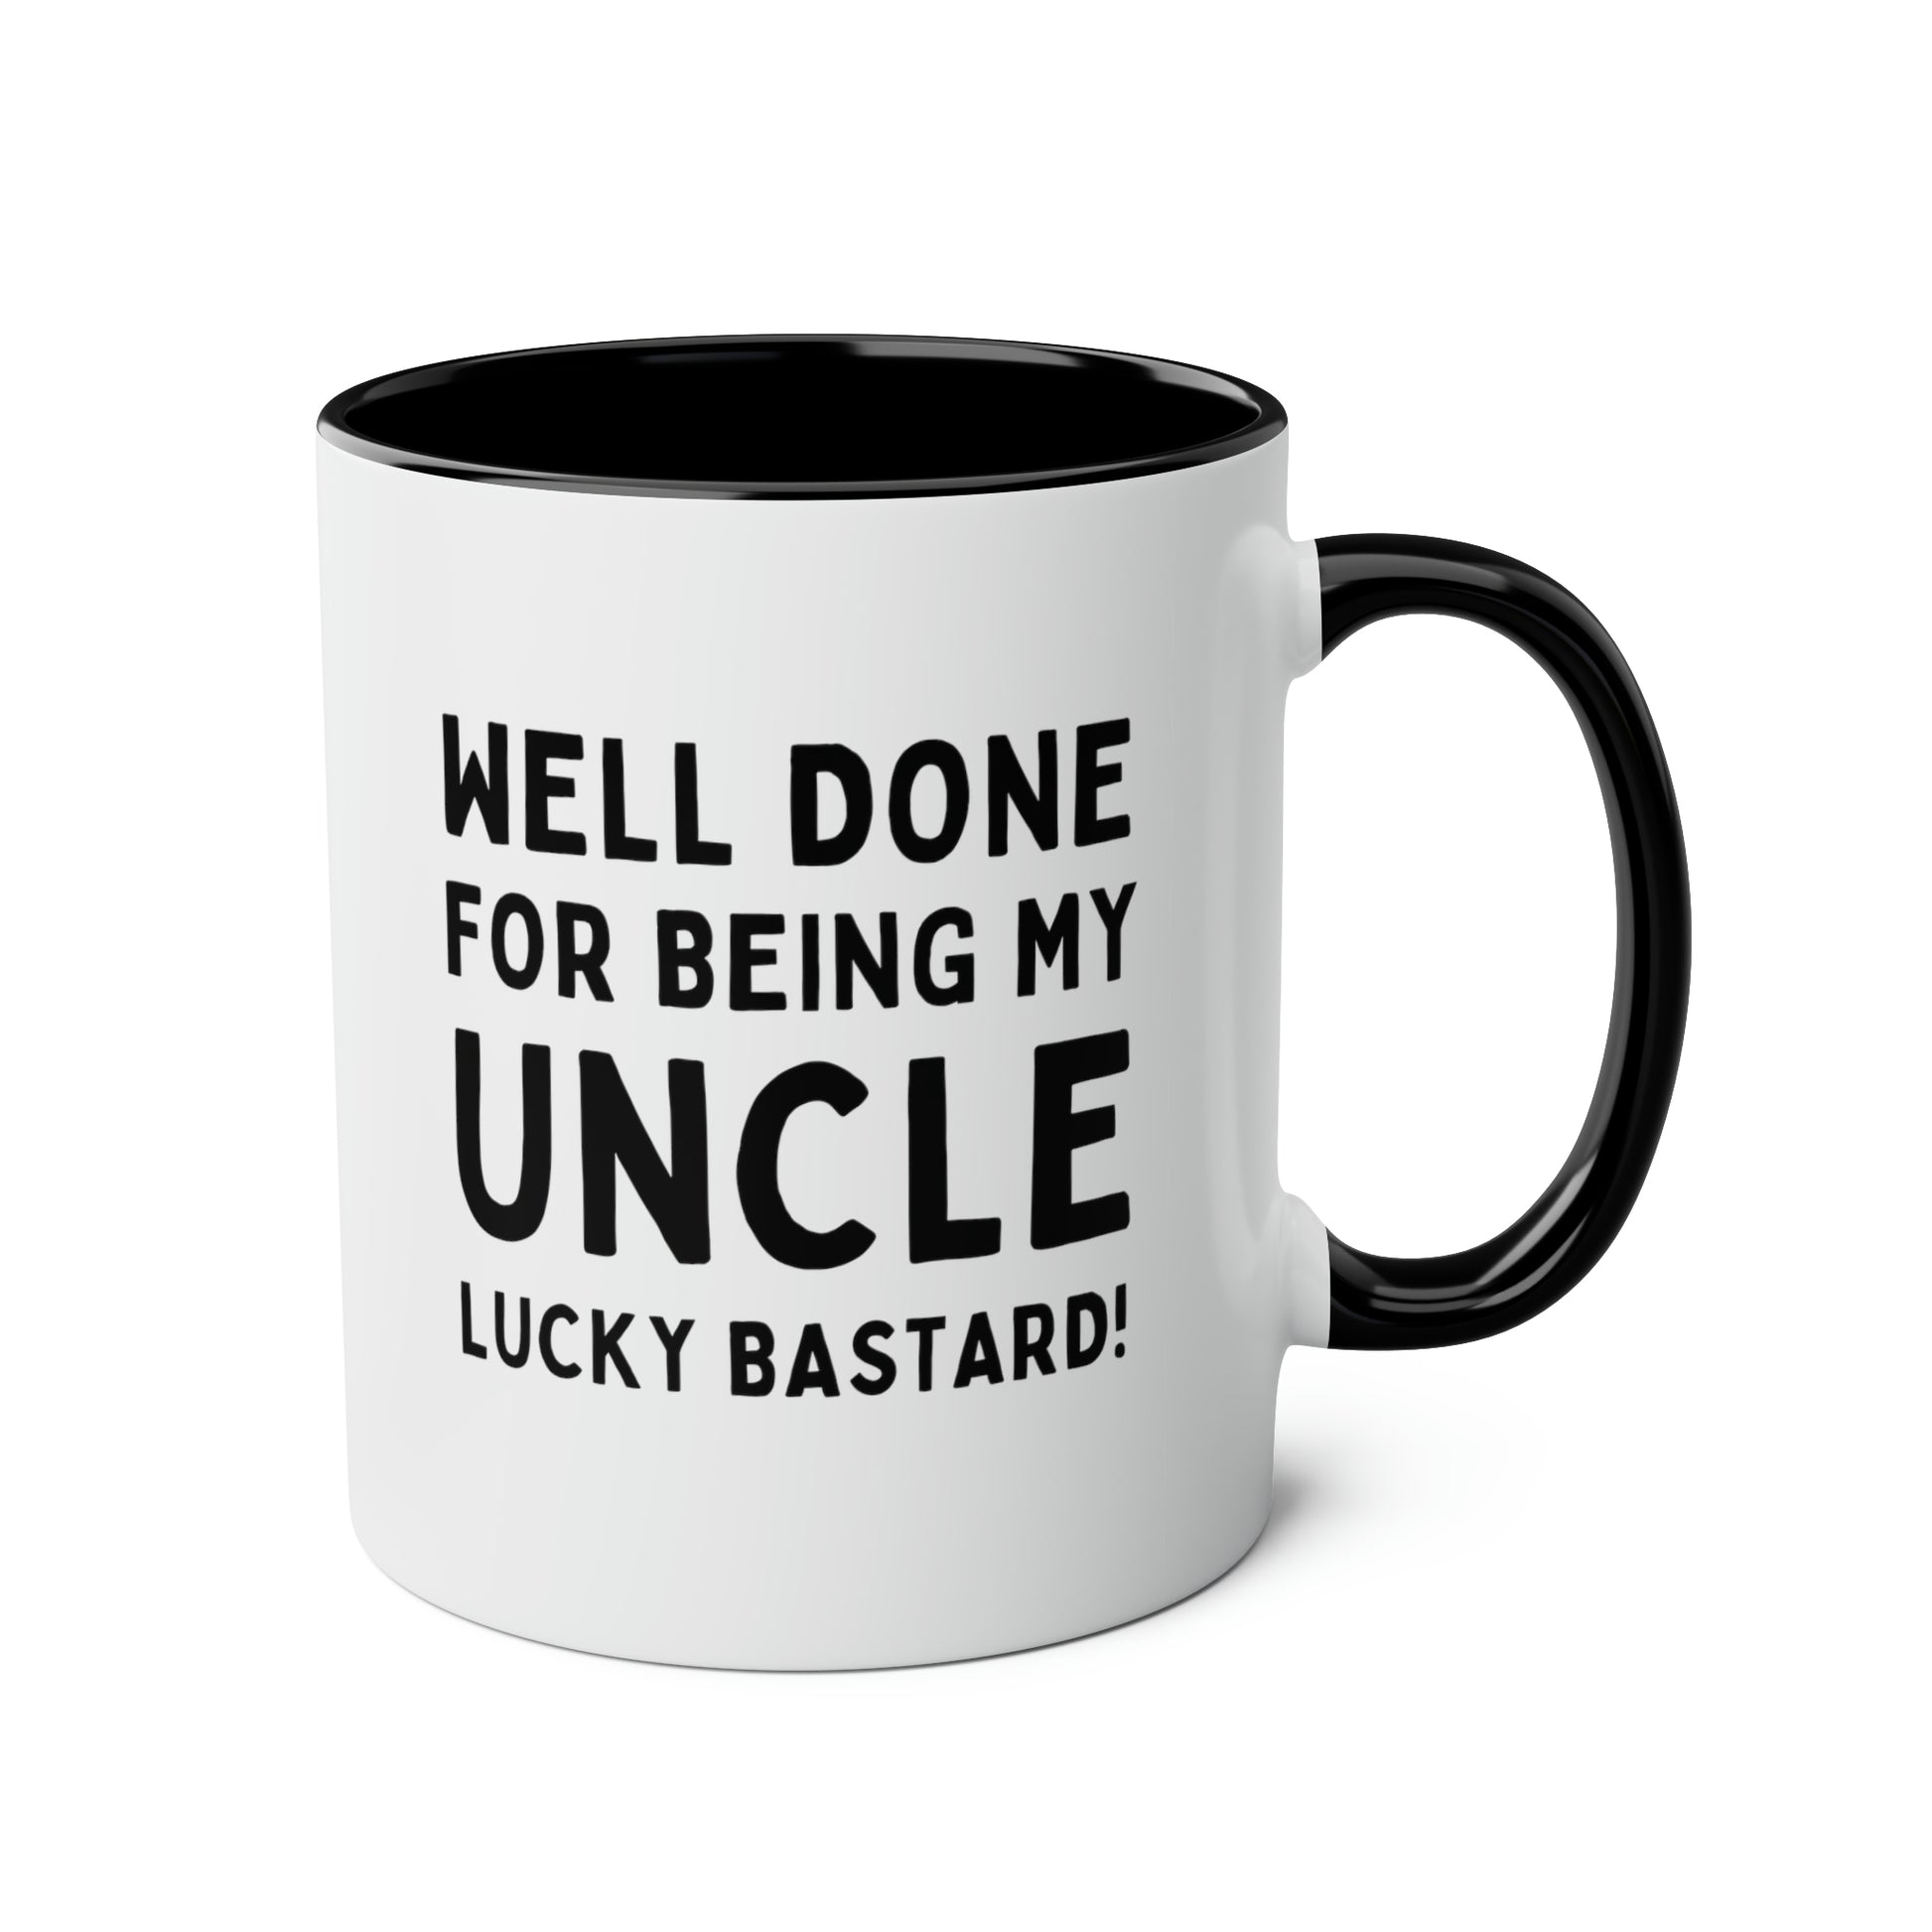 Well Done For Being My Uncle Lucky Bastard 11oz white with black accent funny large coffee mug gift for uncle congrats birthday waveywares wavey wares wavywares wavy wares